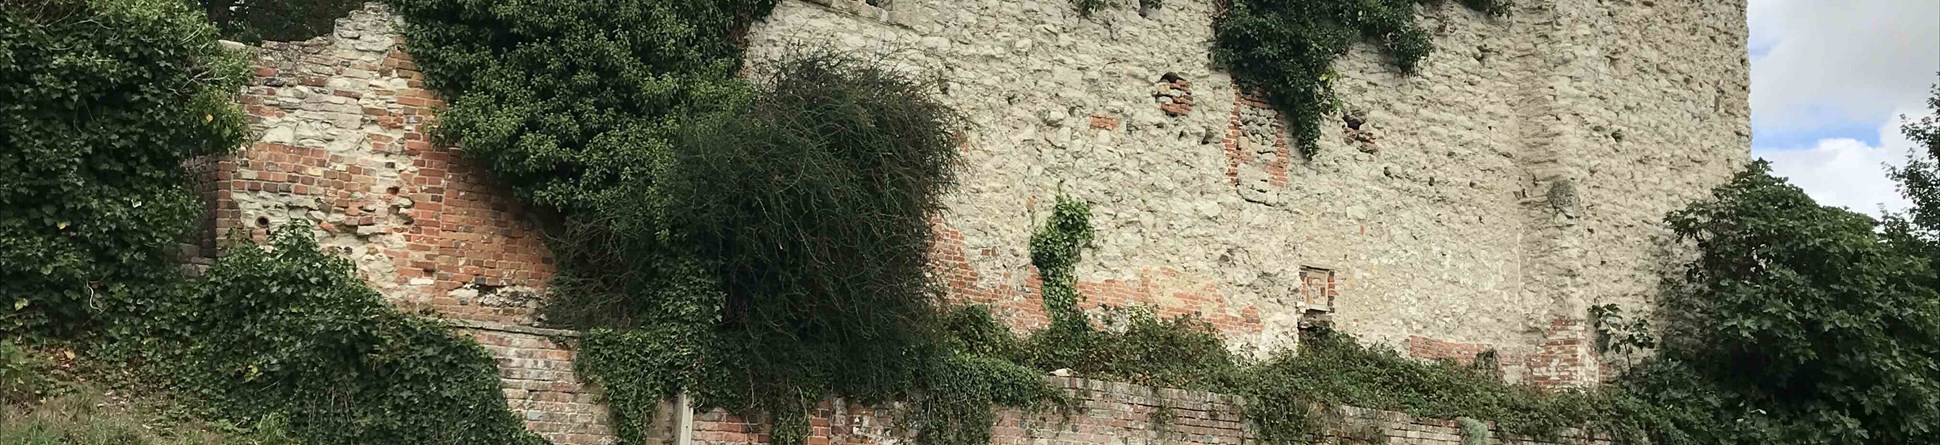 Stone wall remains covered with vegetation